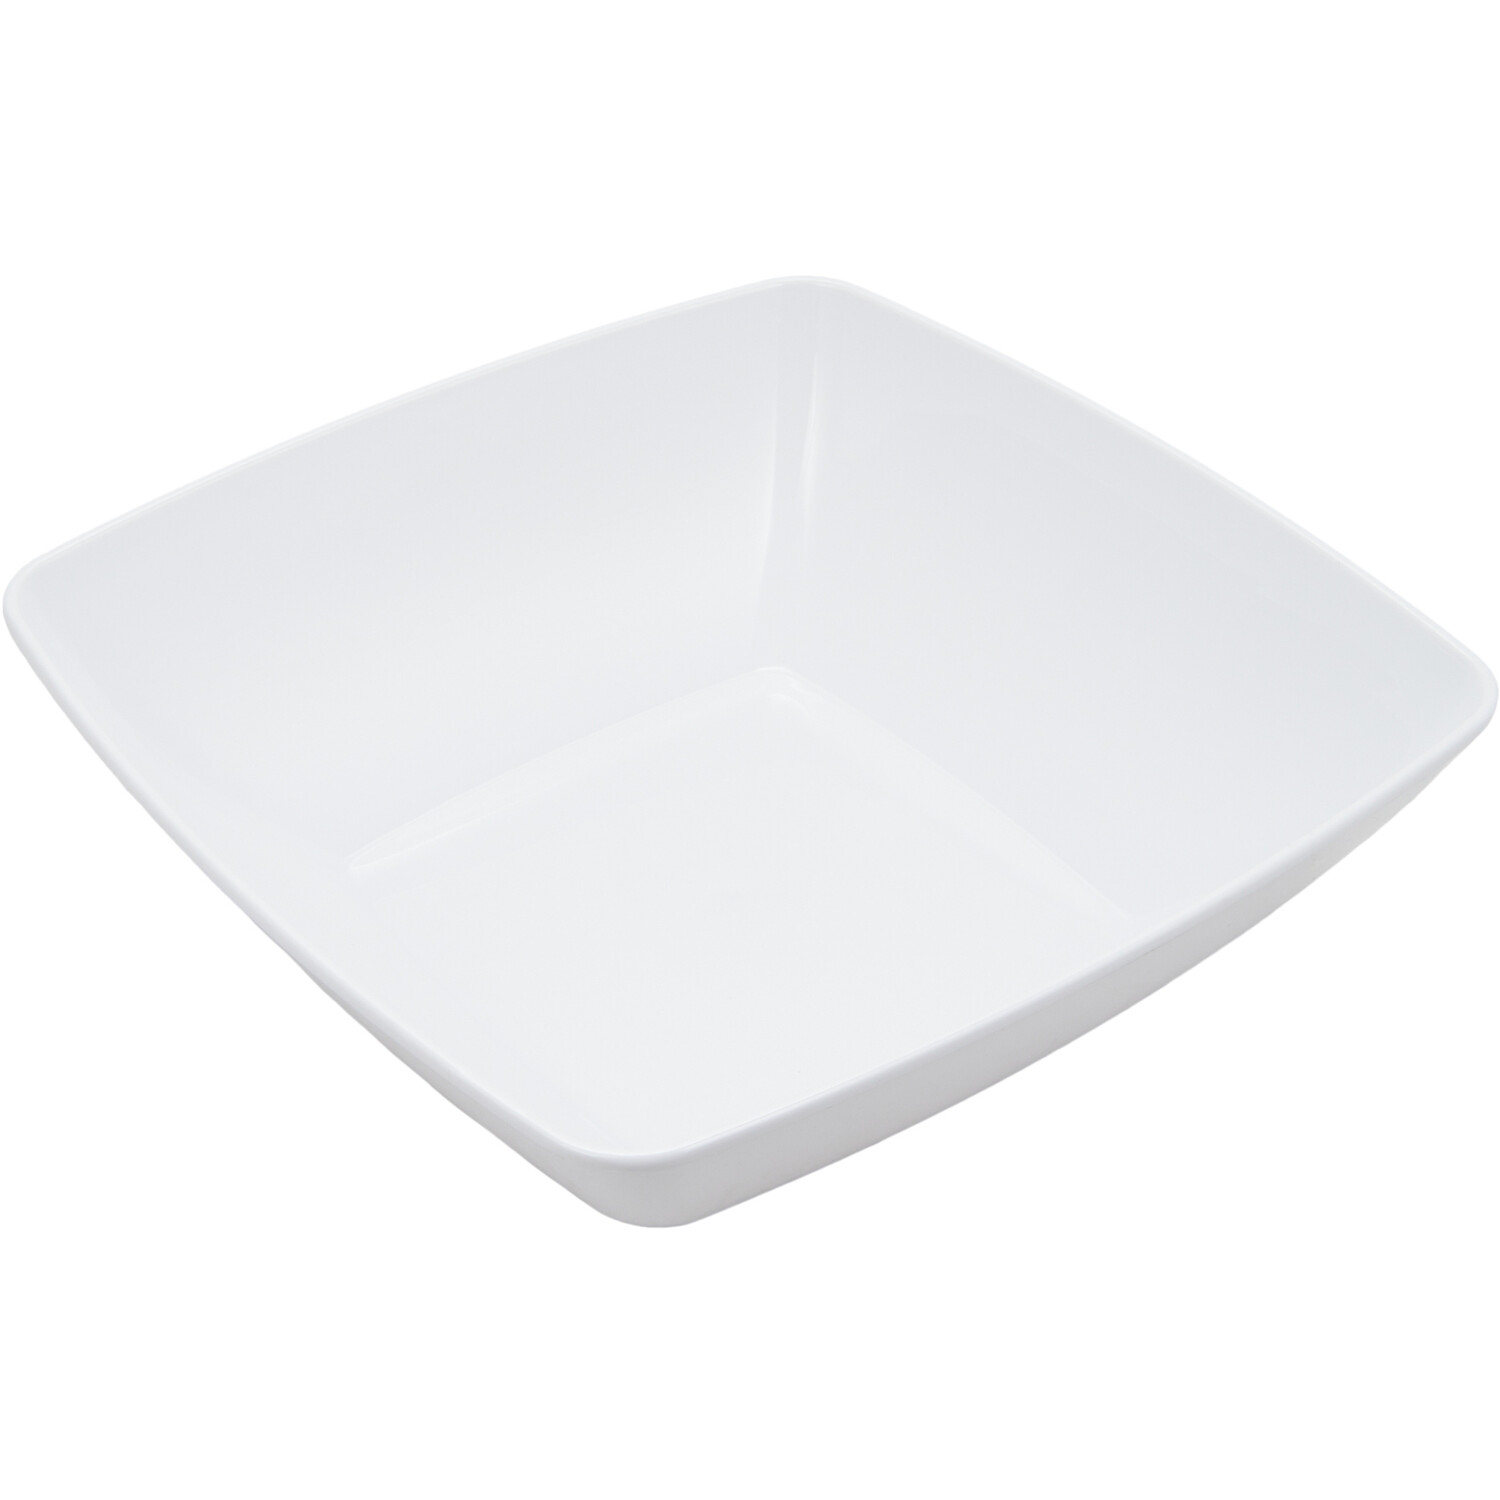 Pack of 2 My Home Square Bowls - White Image 5